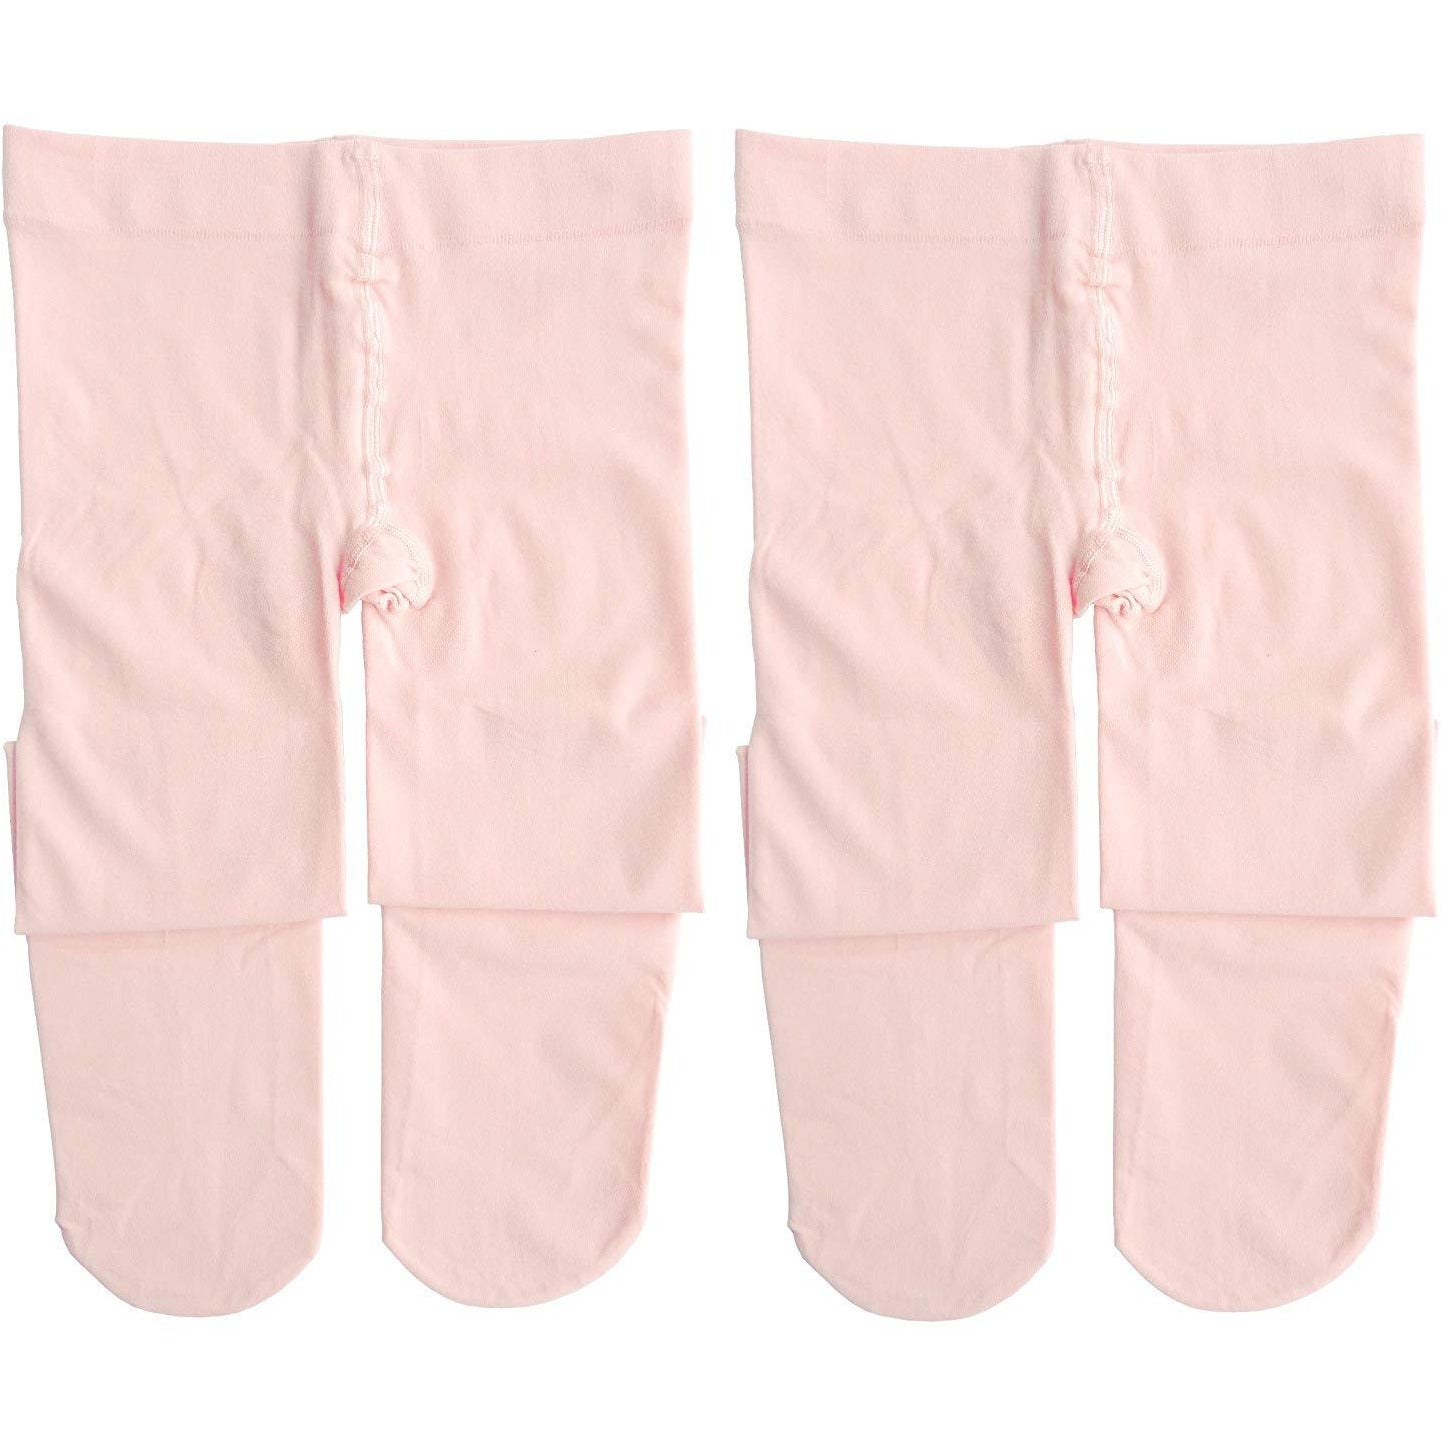  Baby Ballet Tights For Girls Soft Dance Tights Leggings  Toddler Dancing Tights Kids Stockings Pink 3-5T